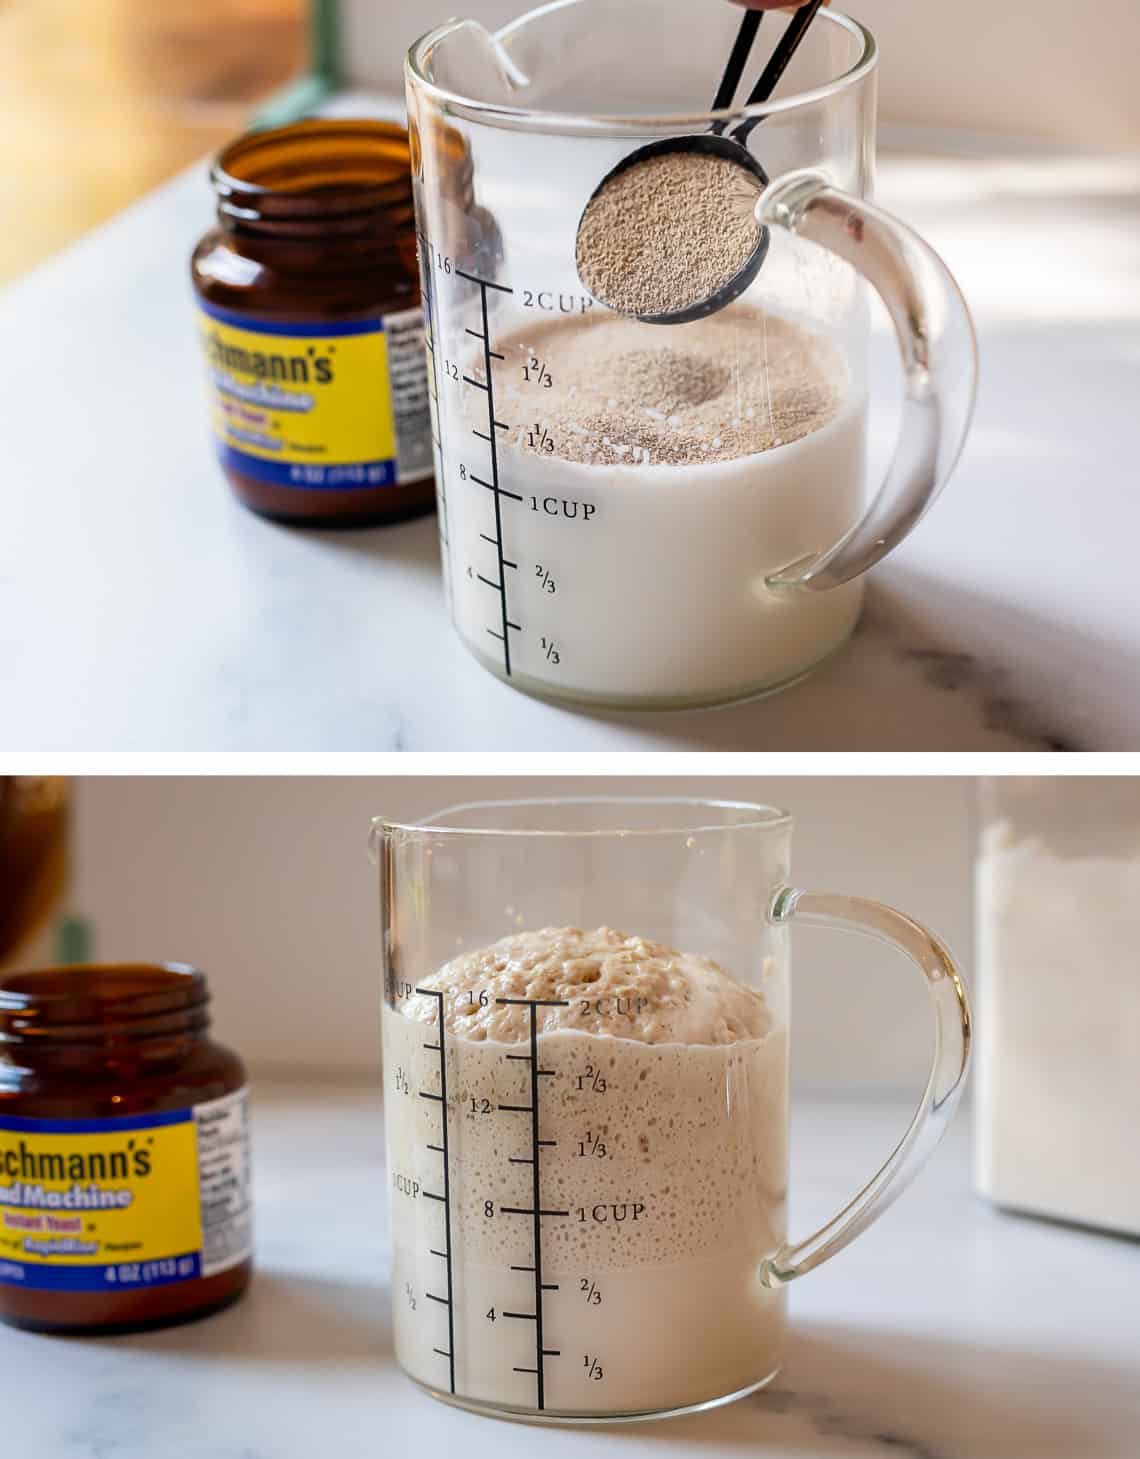 pouring yeast from a measuring spoon into a glass liquid measuring cup of milk.